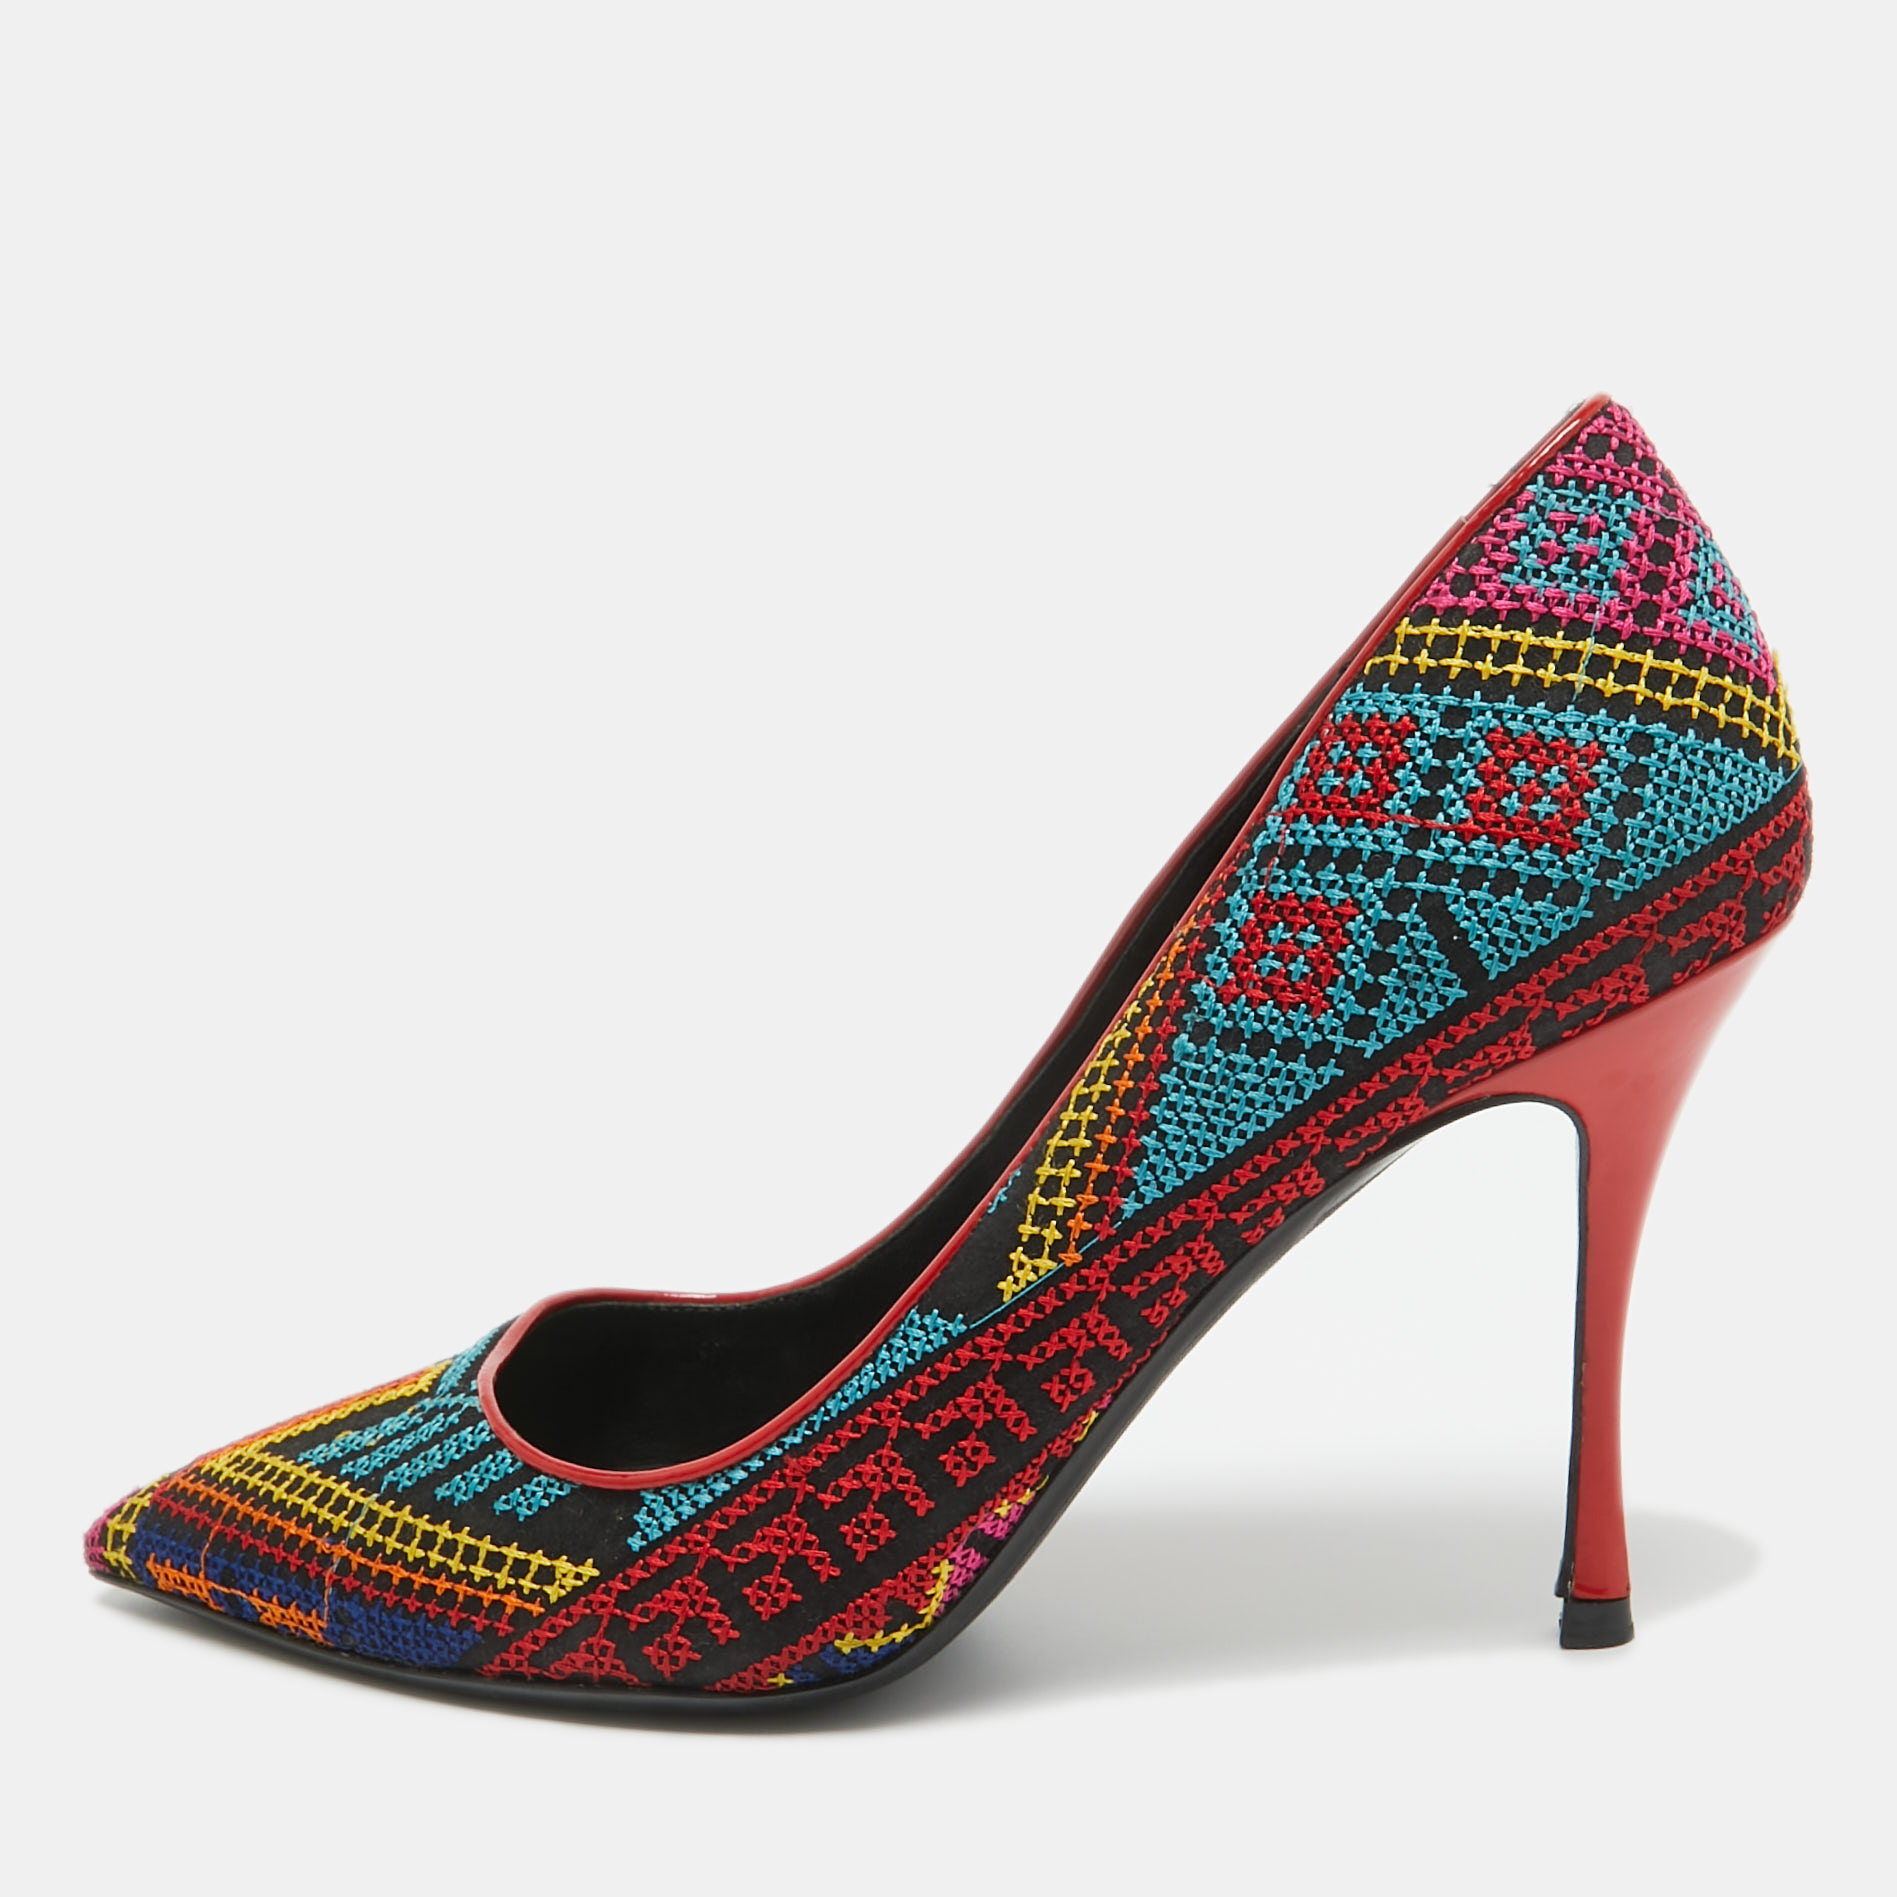 Nicholas kirkwood multicolor mexican embroidered fabric pointed toe pumps size 37